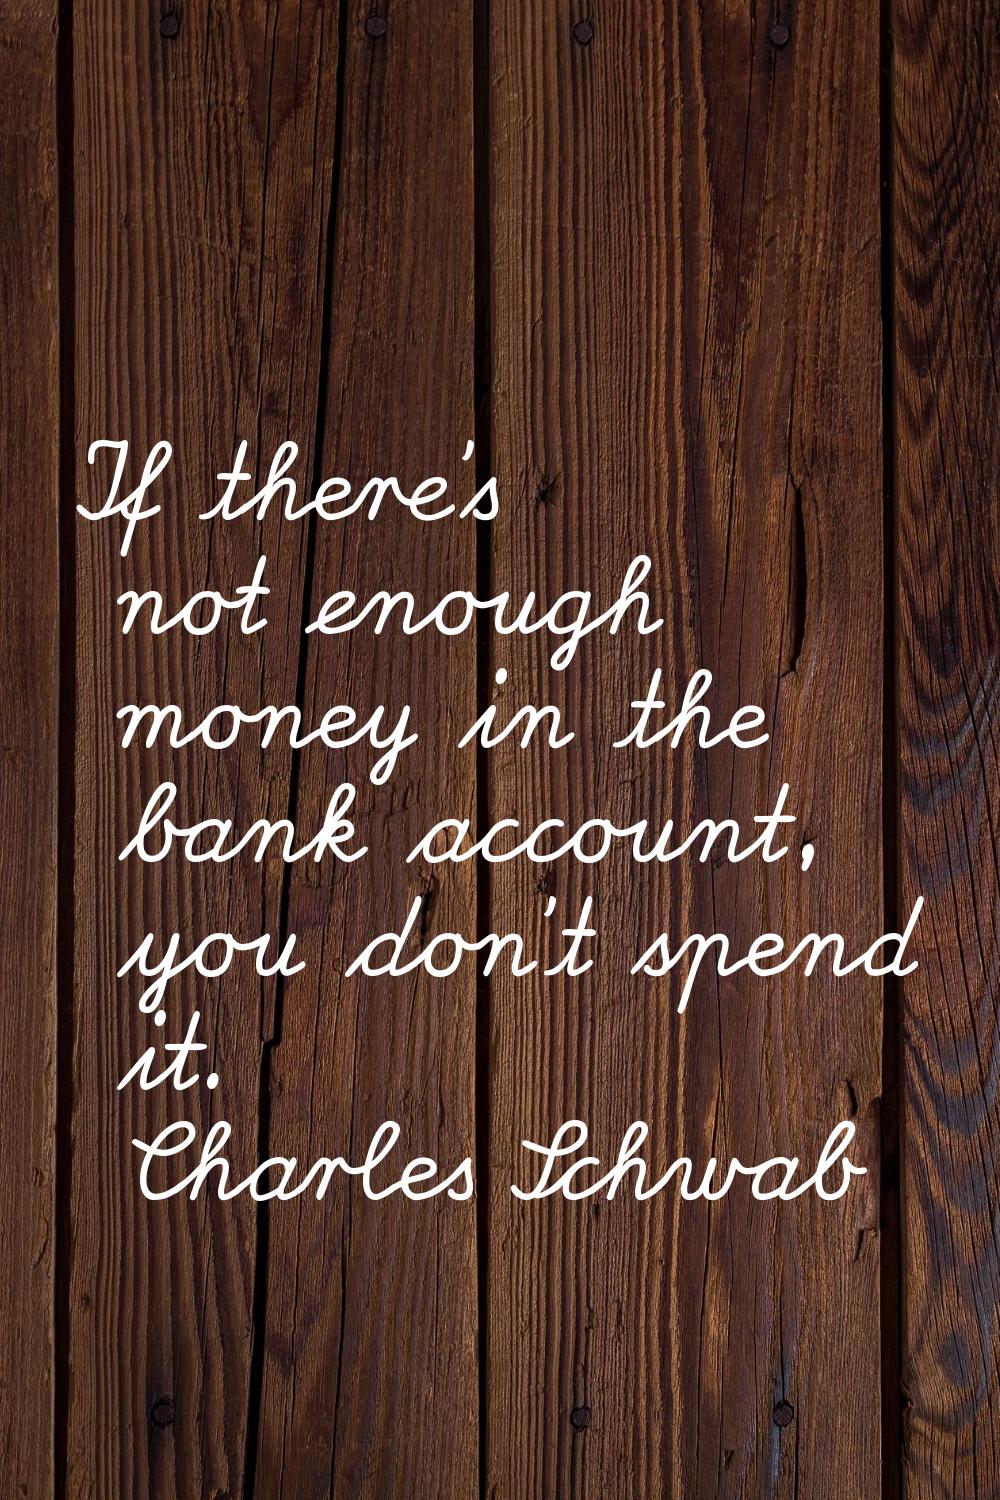 If there's not enough money in the bank account, you don't spend it.